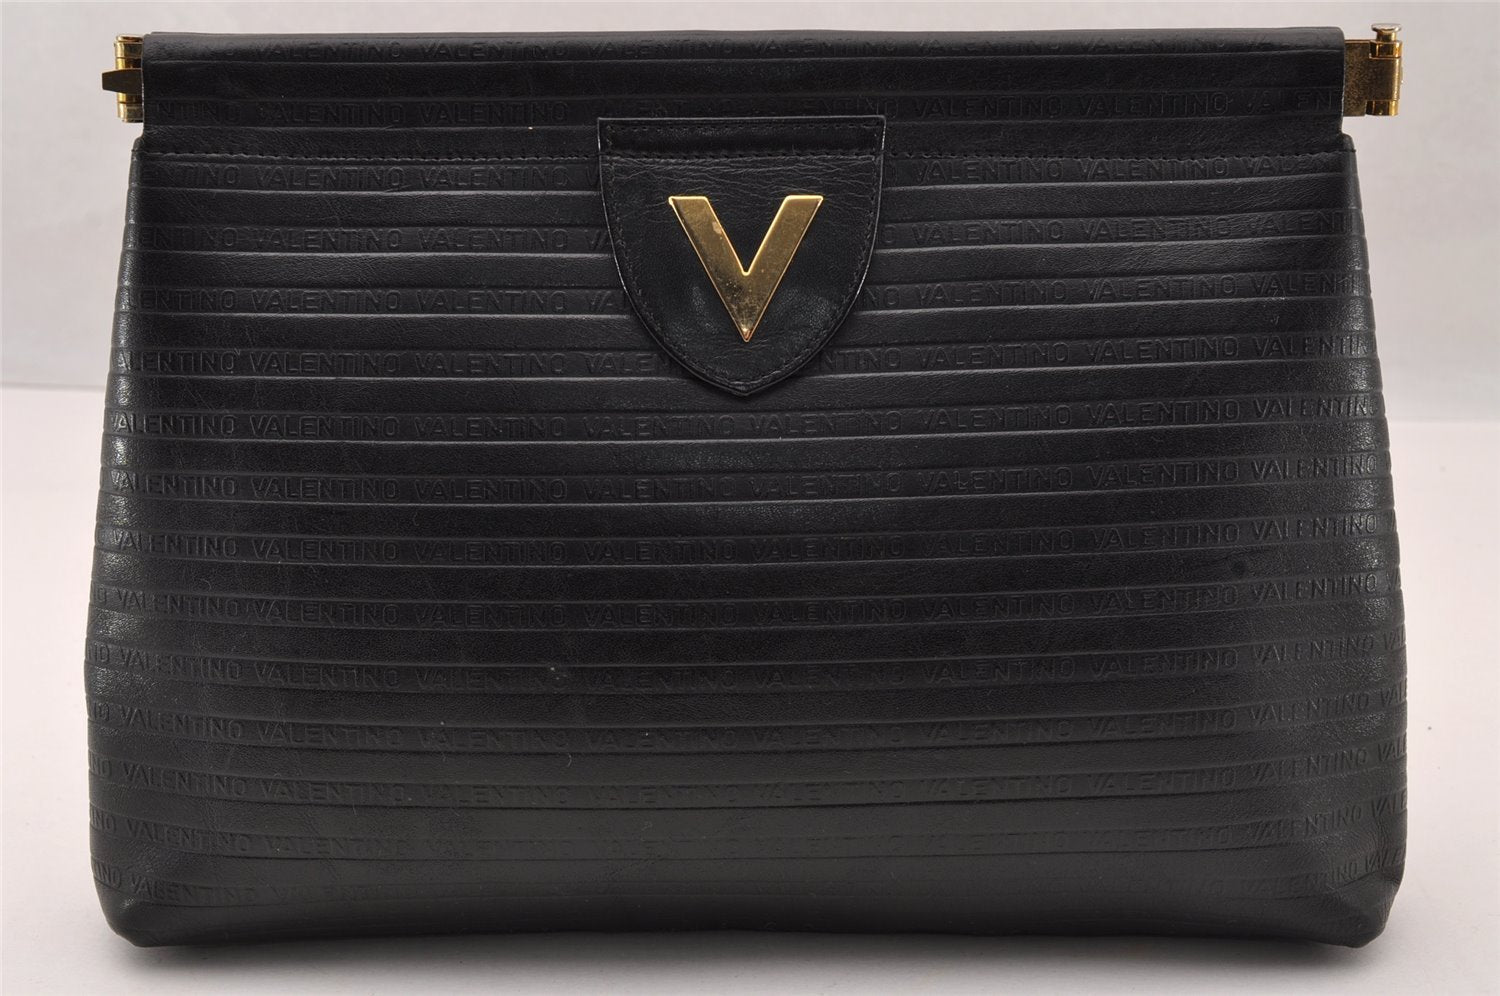 Authentic VALENTINO Vintage Clutch Hand Bag Purse Leather Black 3685I